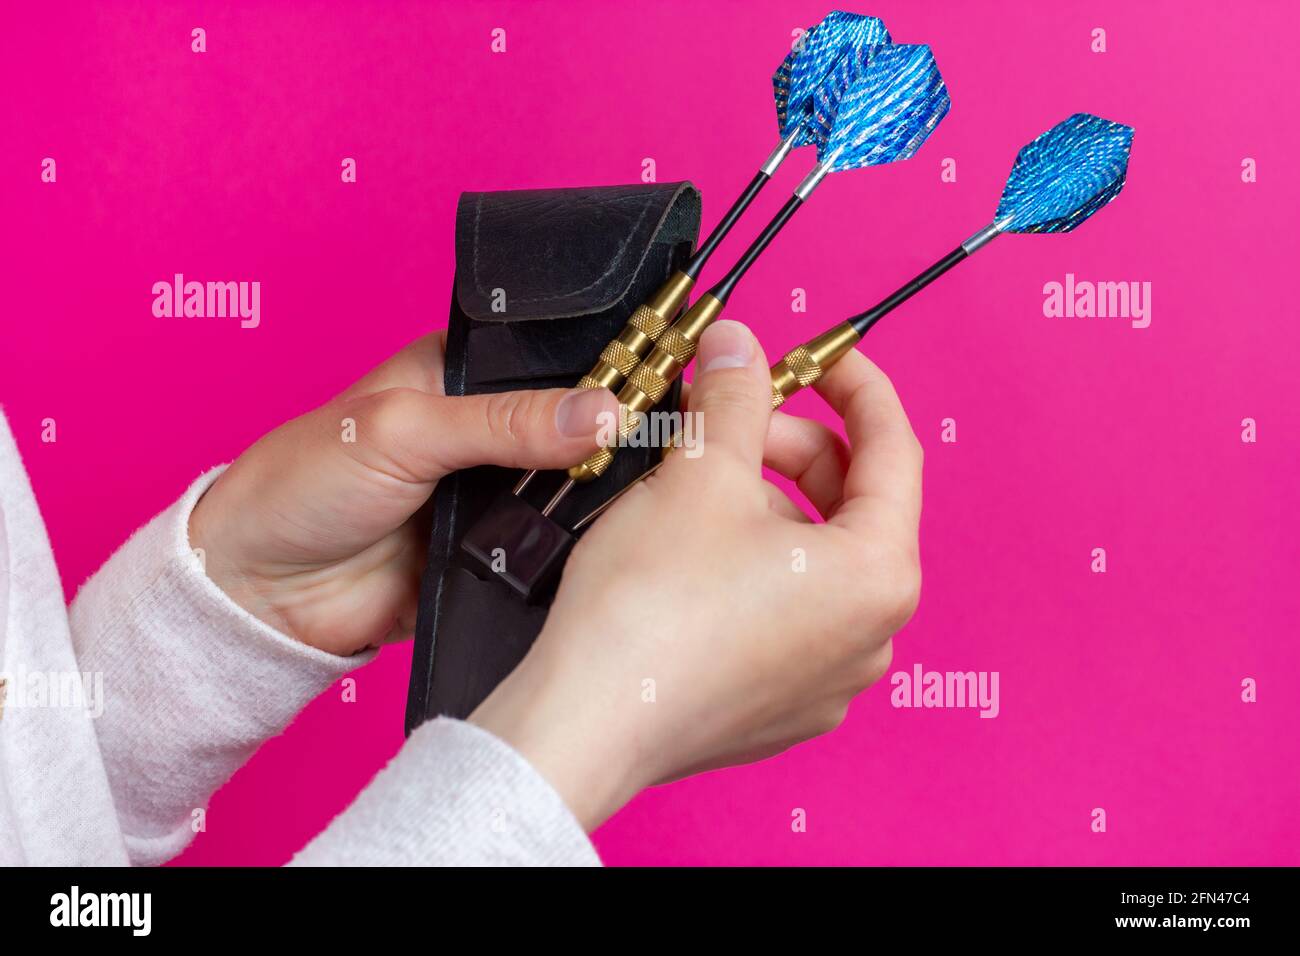 Choosing a dart. Three darts in the hands of the player. Stock Photo